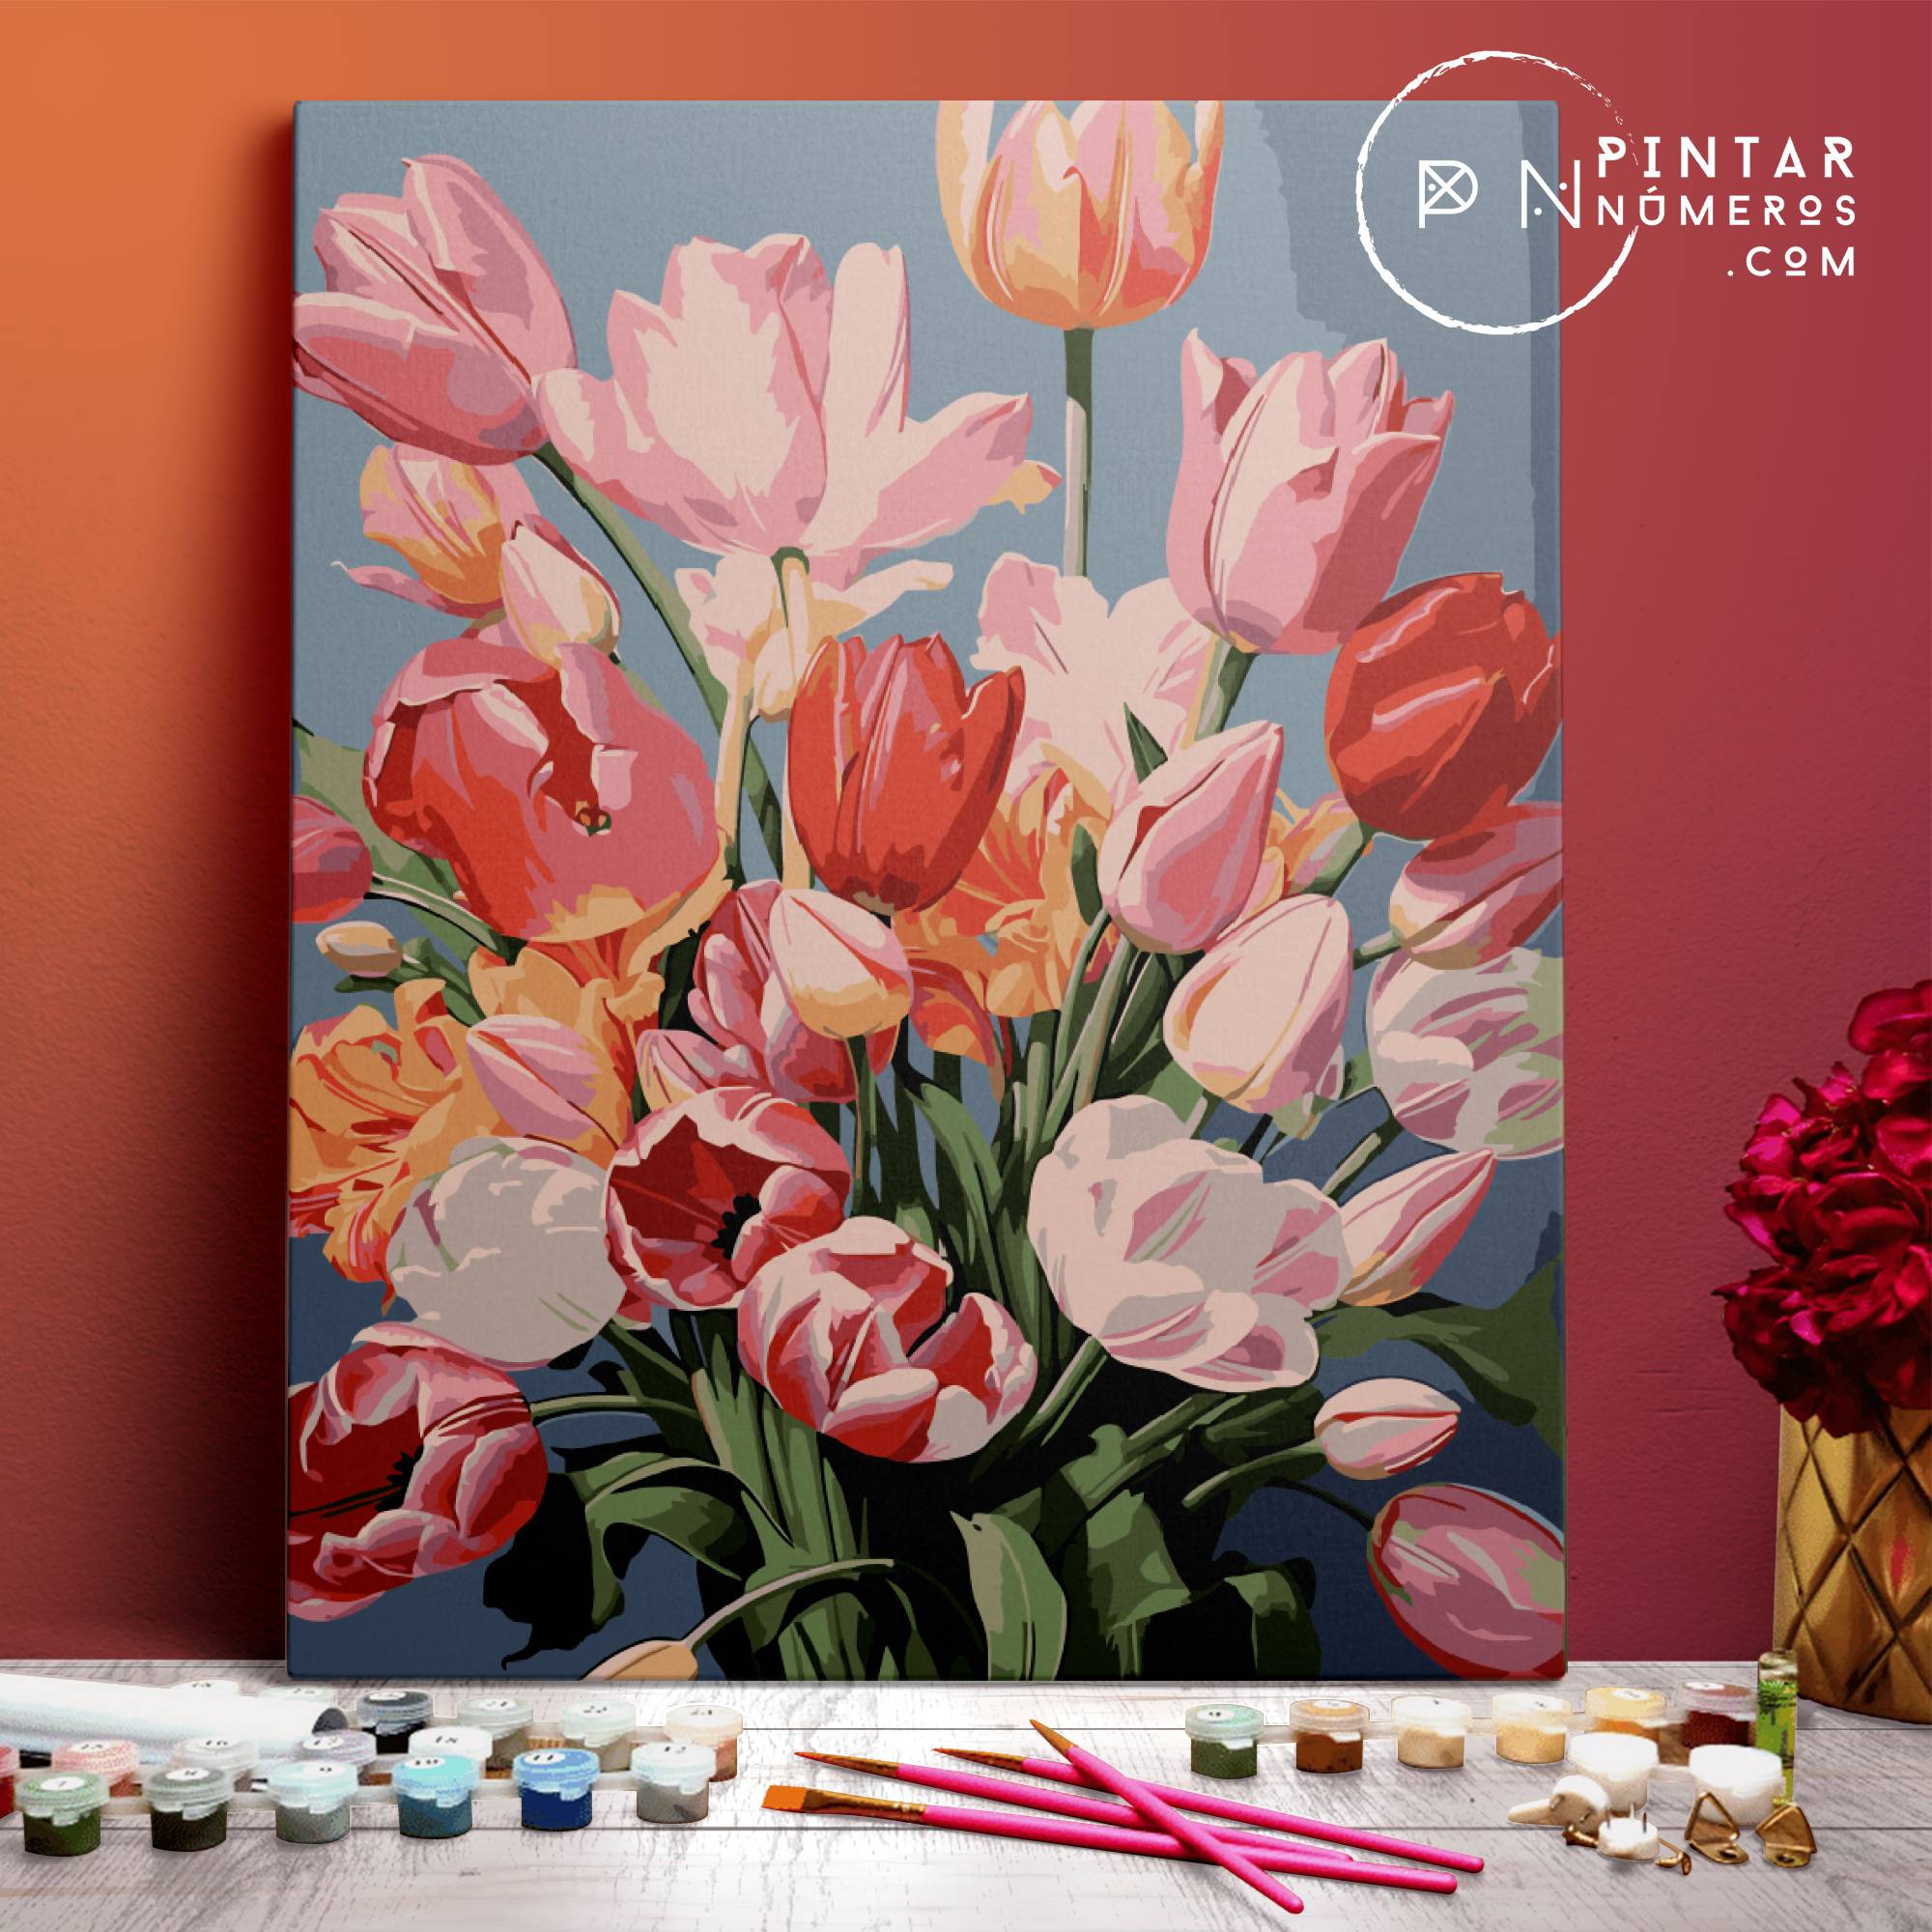 Tulips - Paint Numbers®